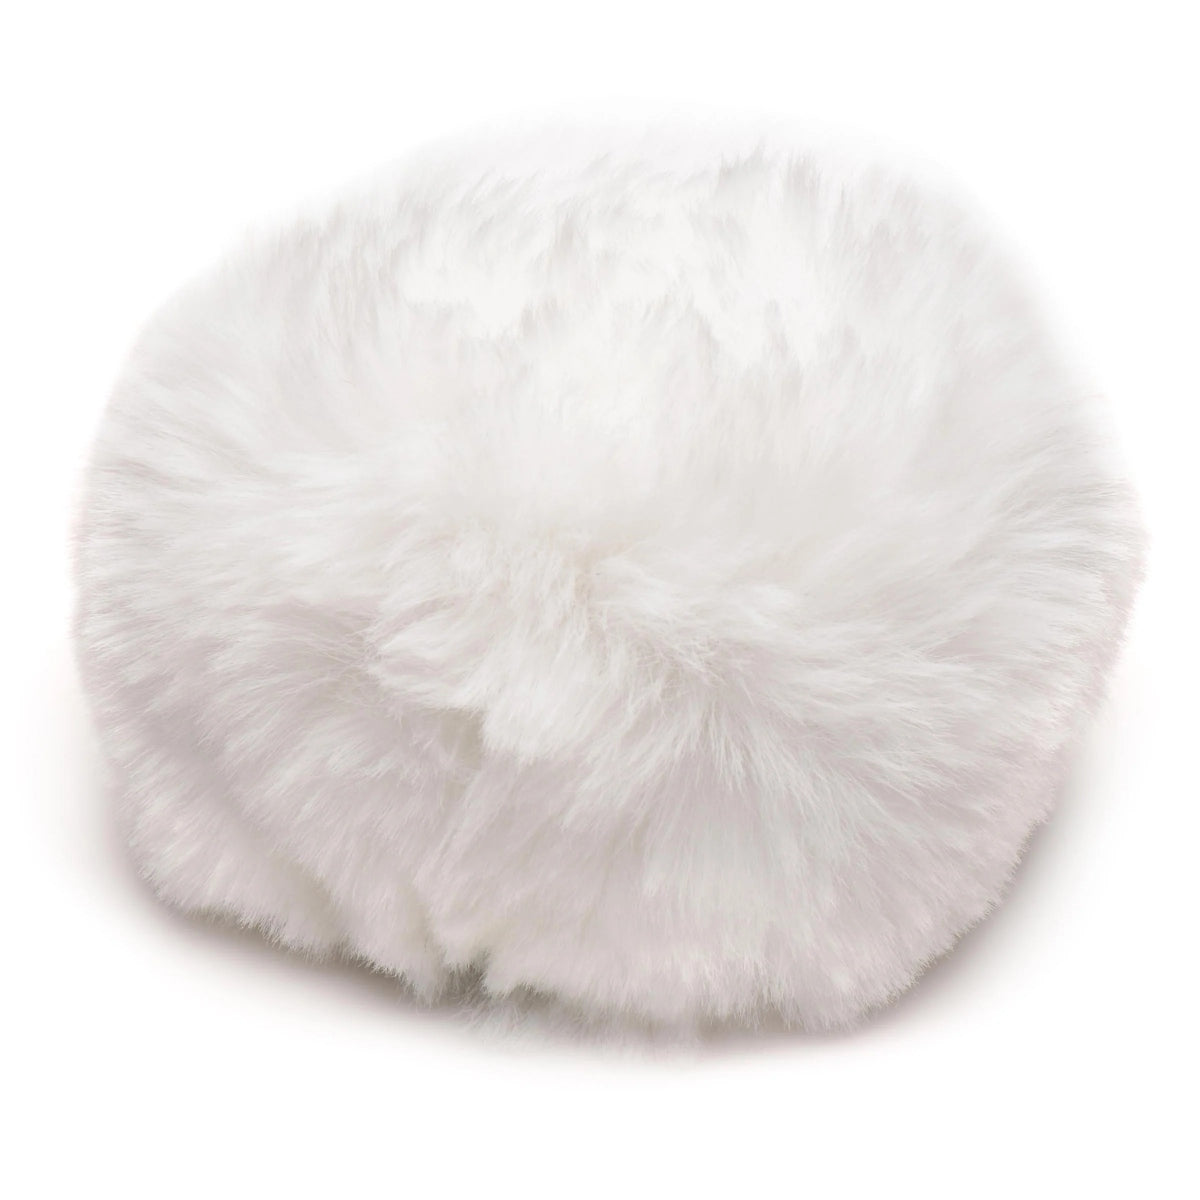 Tailz Snap-On Interchangeable Bunny Tail White